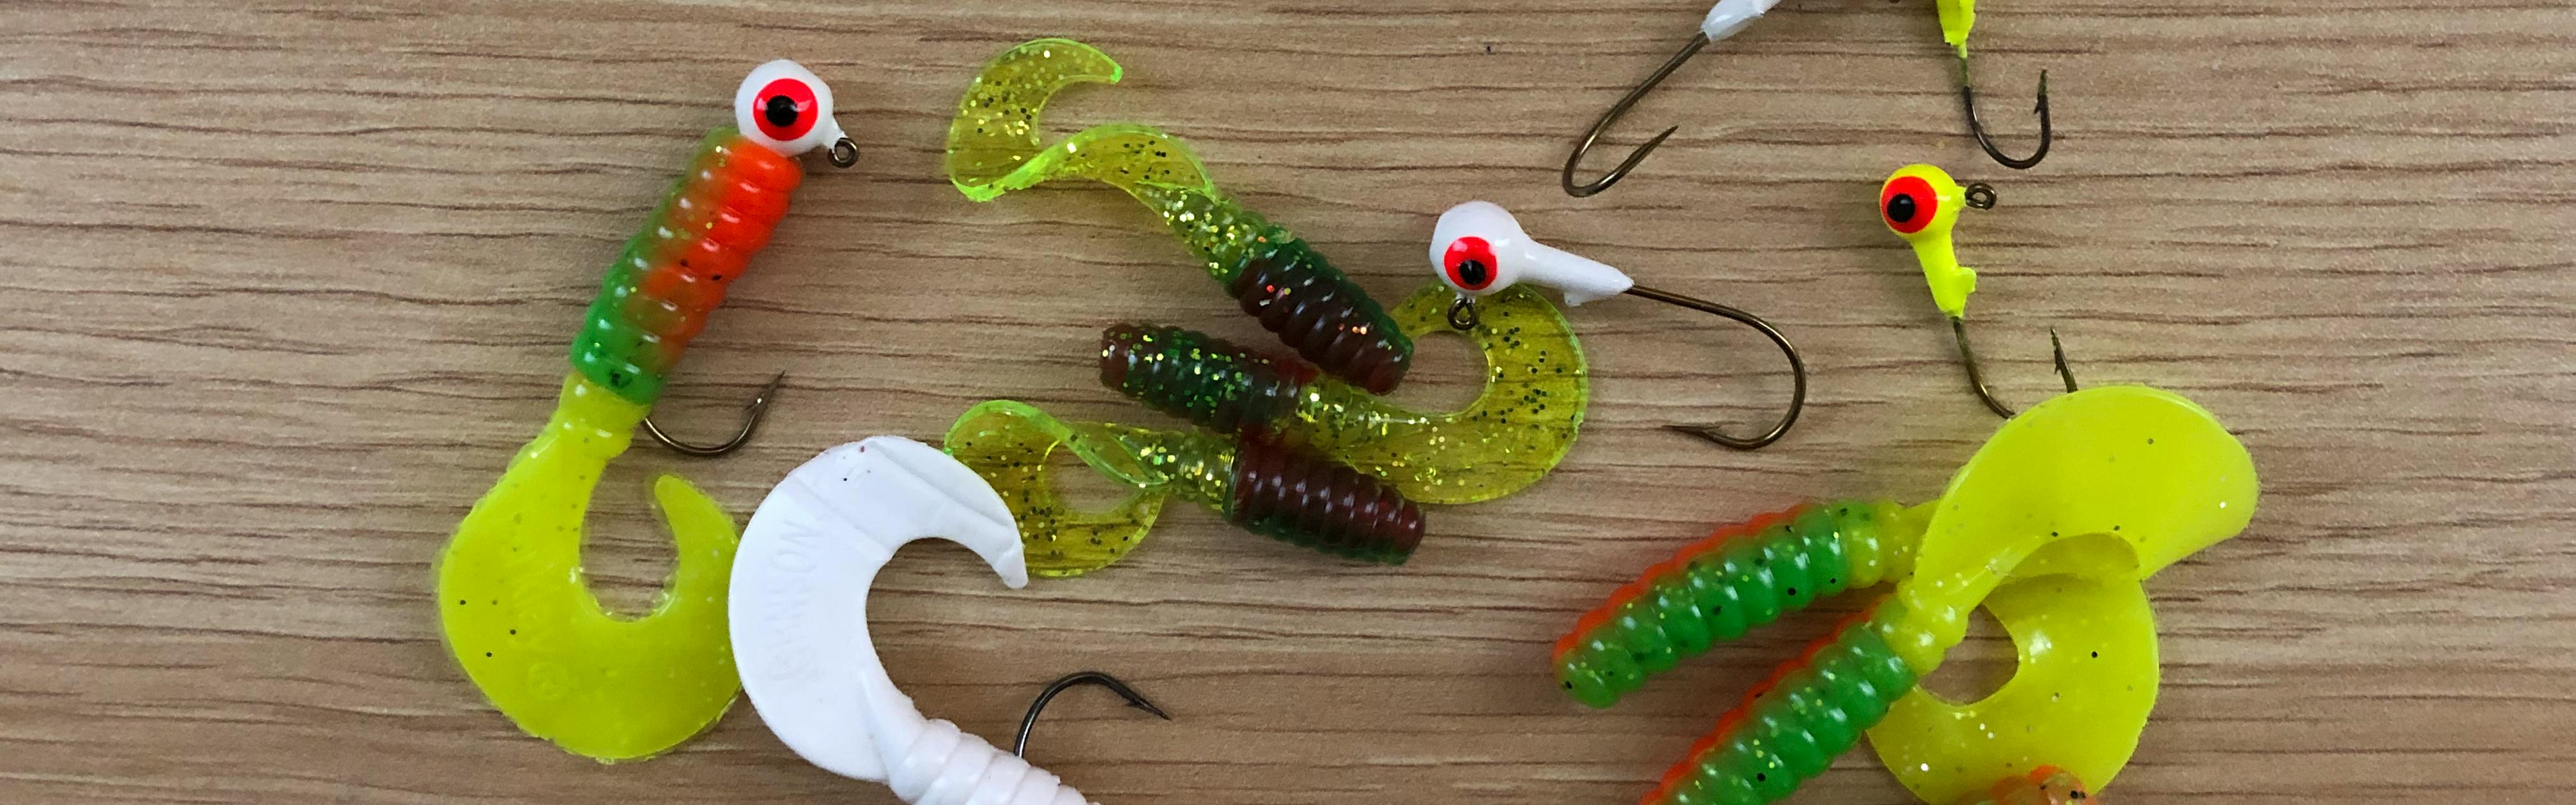 Curl Tail Worm Soft Lure Artificial Fishing Swimbait 